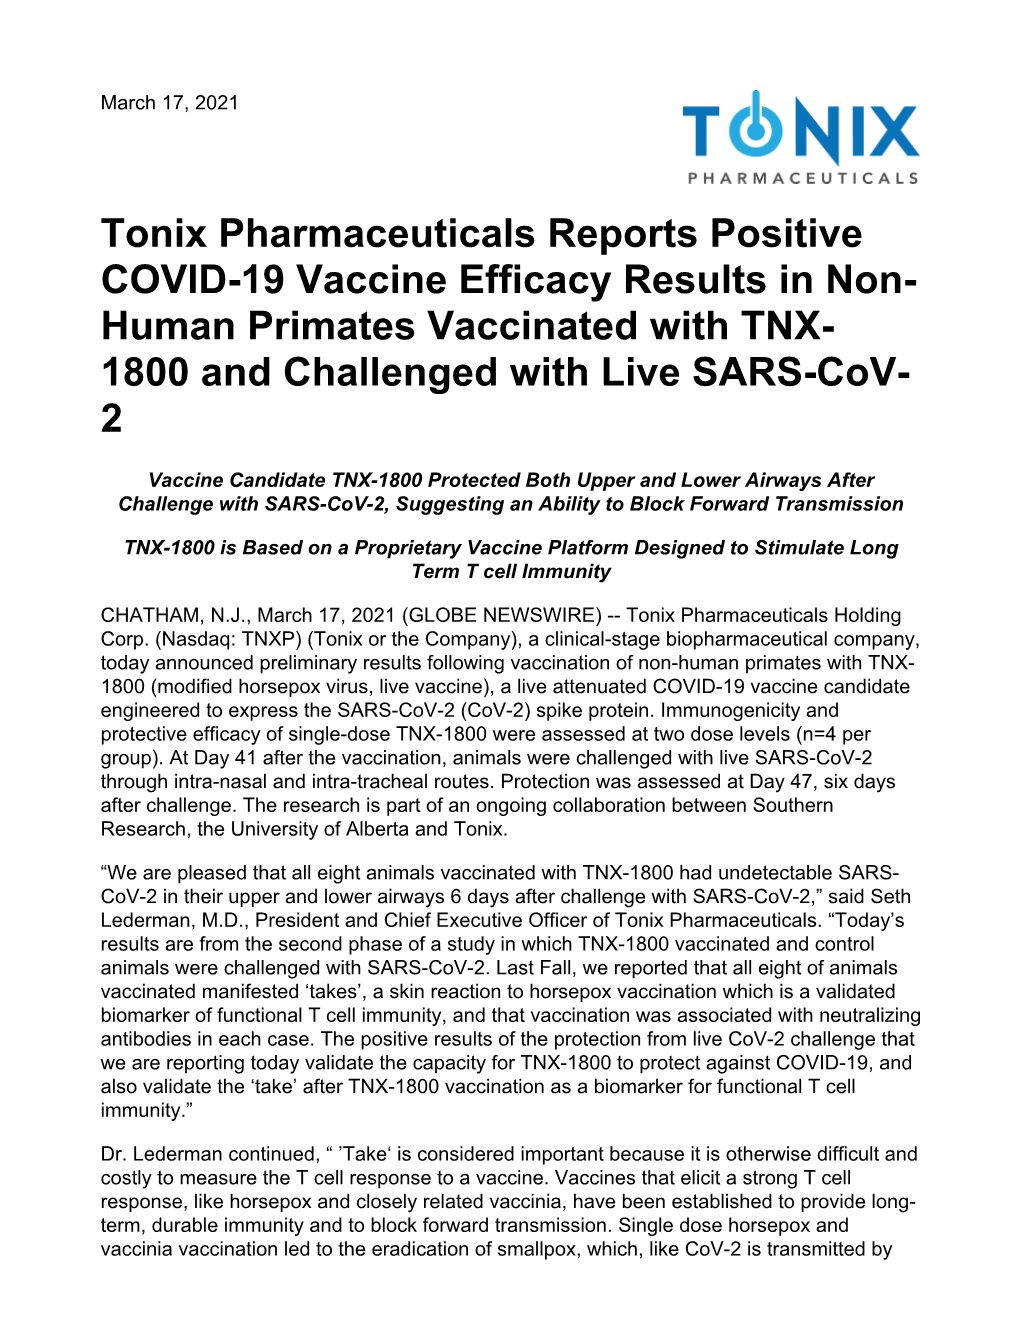 Tonix Pharmaceuticals Reports Positive COVID-19 Vaccine Efficacy Results in Non- Human Primates Vaccinated with TNX- 1800 and Challenged with Live SARS-Cov- 2